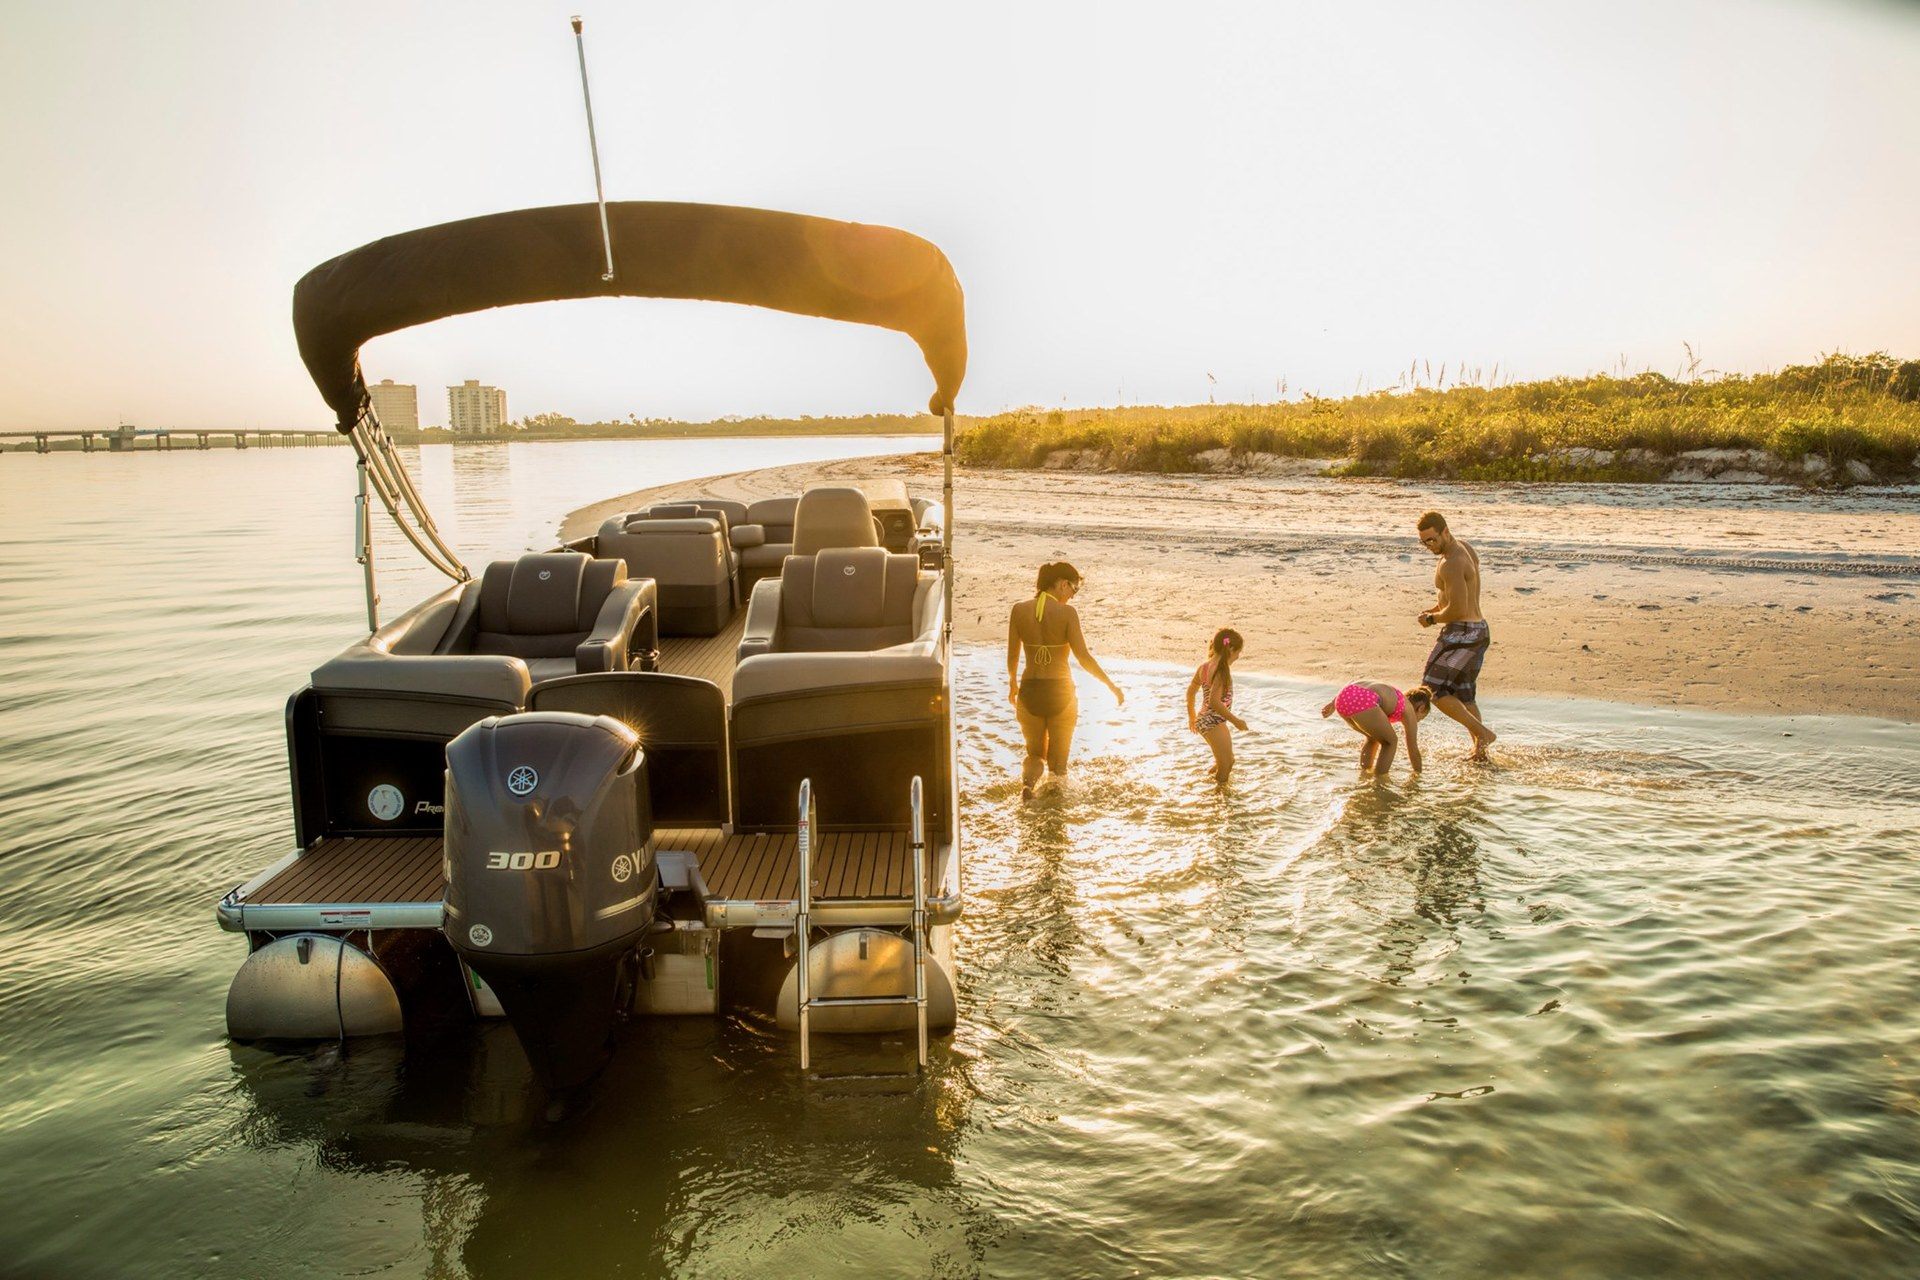 Image Fun Accessories for Your Pontoon Boat a family of four by a Premier Pontoon Escalade boat